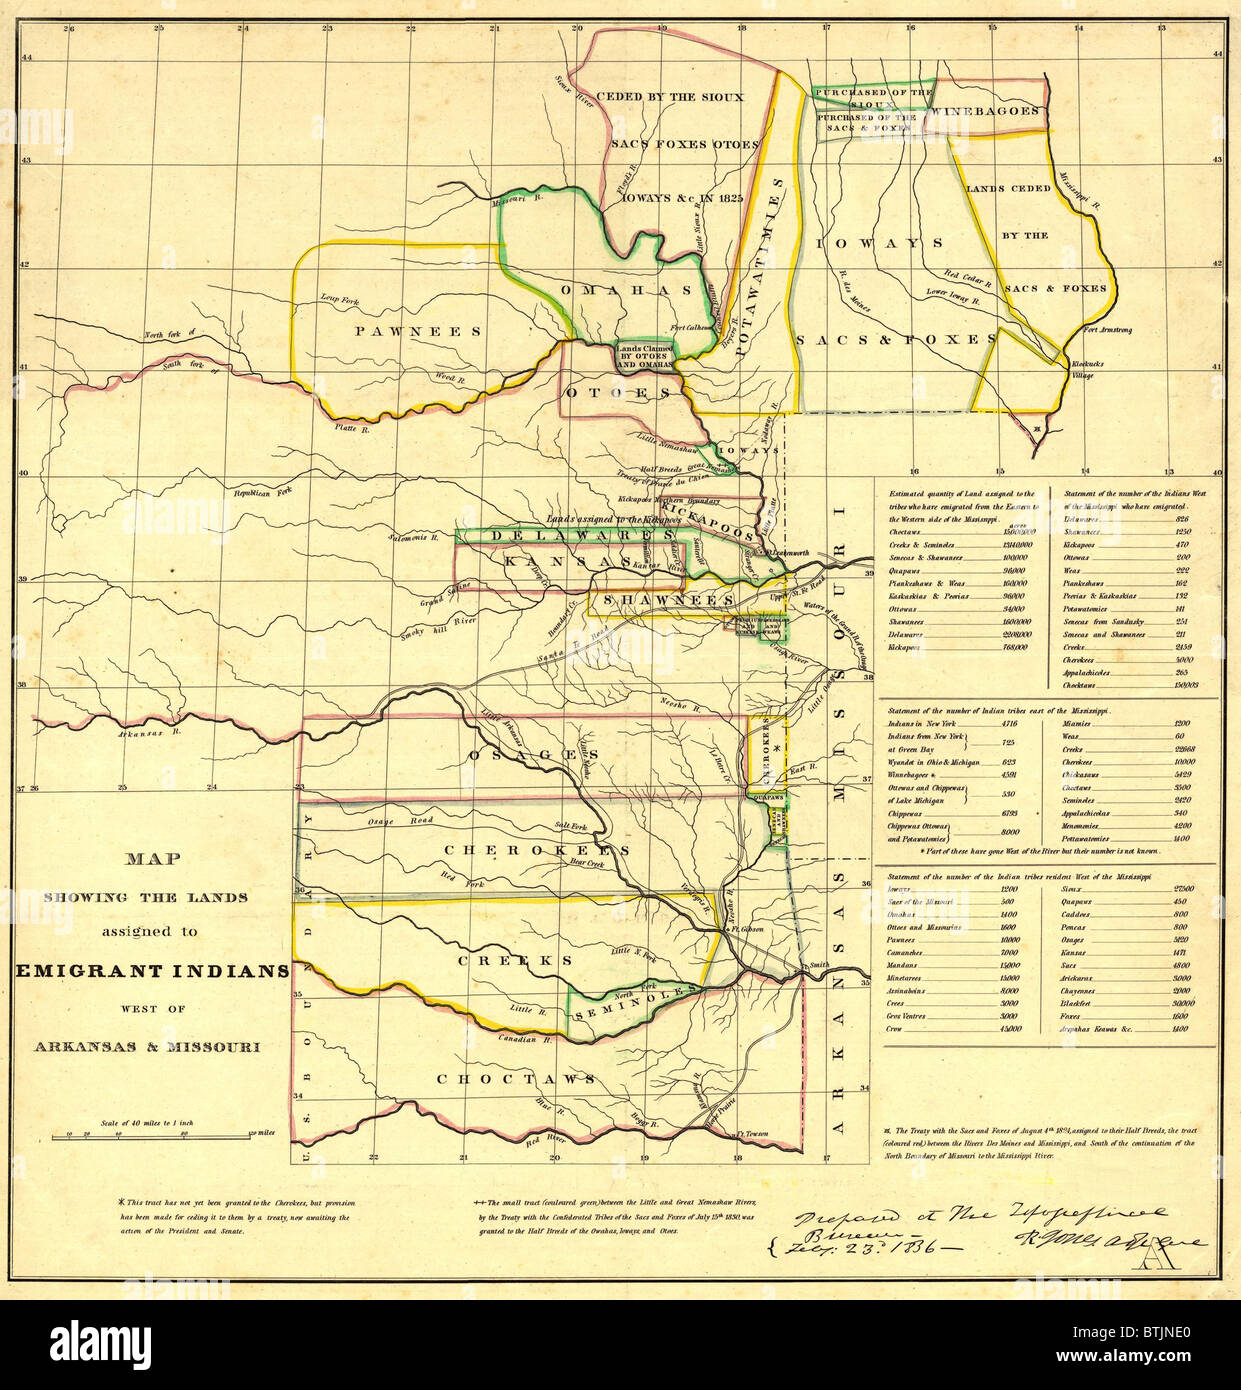 1836 Map showing the Indian Territories (now Oklahoma) assigned to displaced Eastern Indians tribes; Cherokees, Creeks, Choctaws, Osages, and Seminoles. Stock Photo